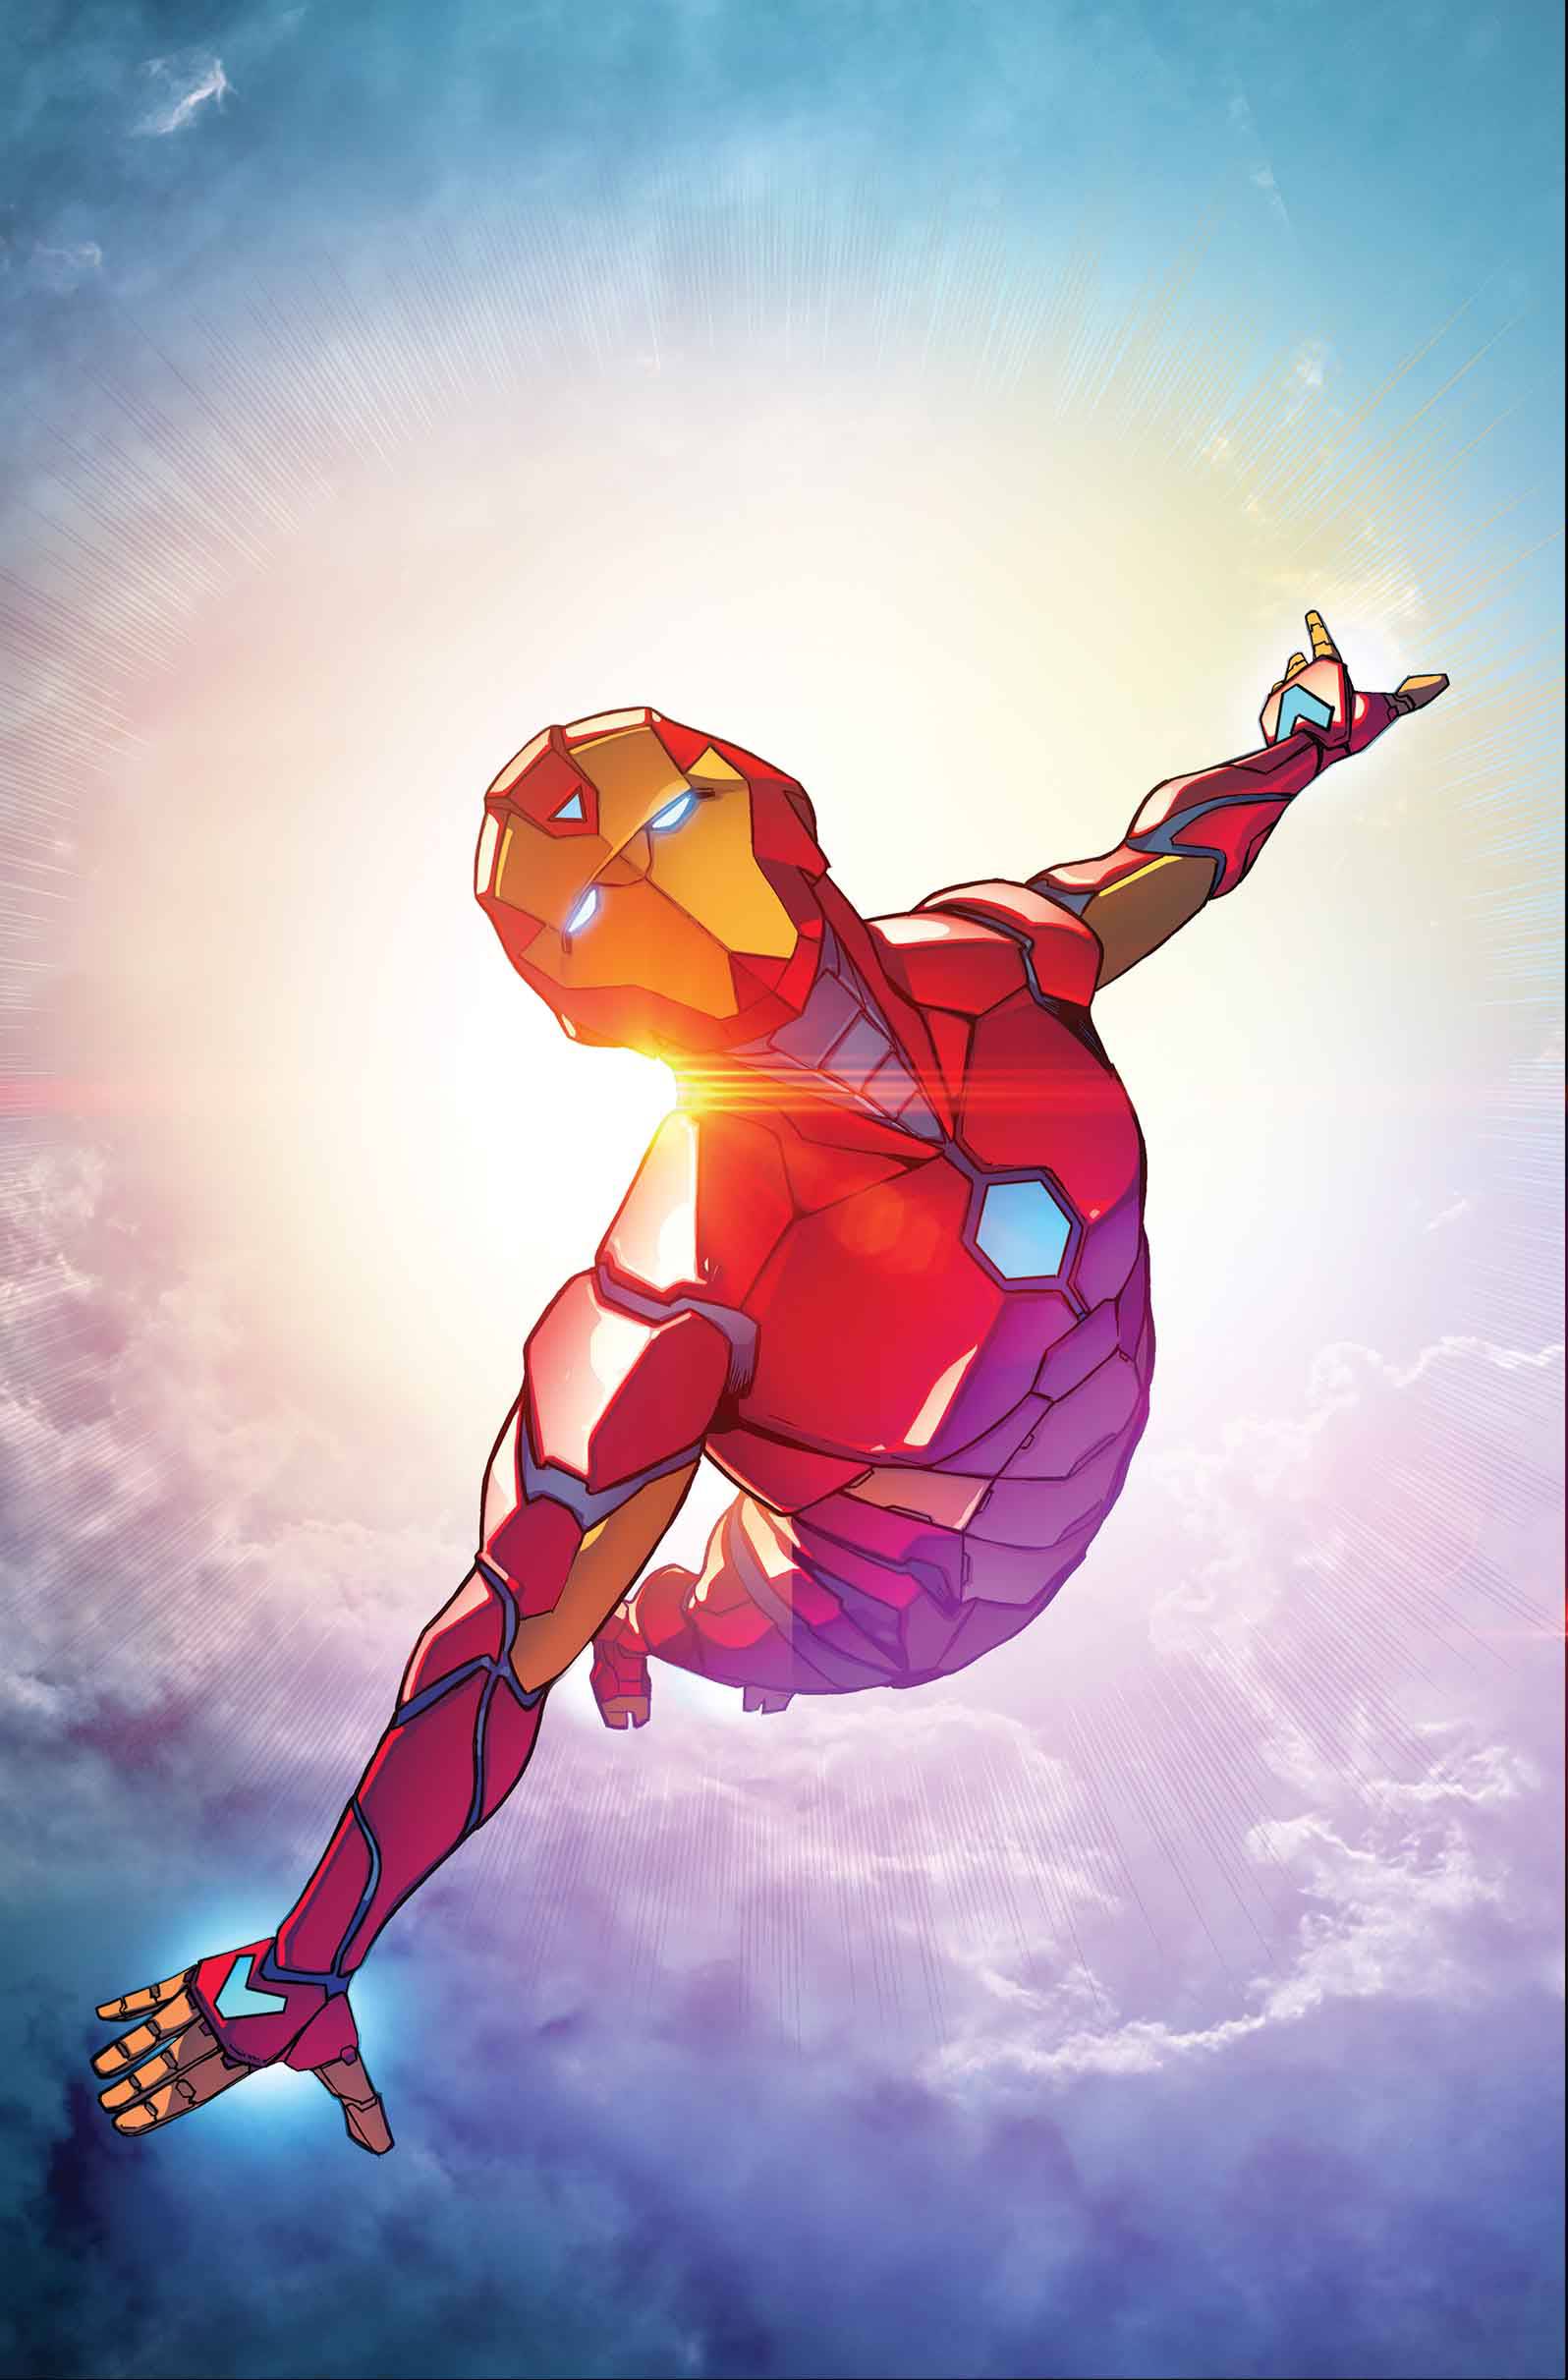 Invincible Iron Man by Caselli Poster